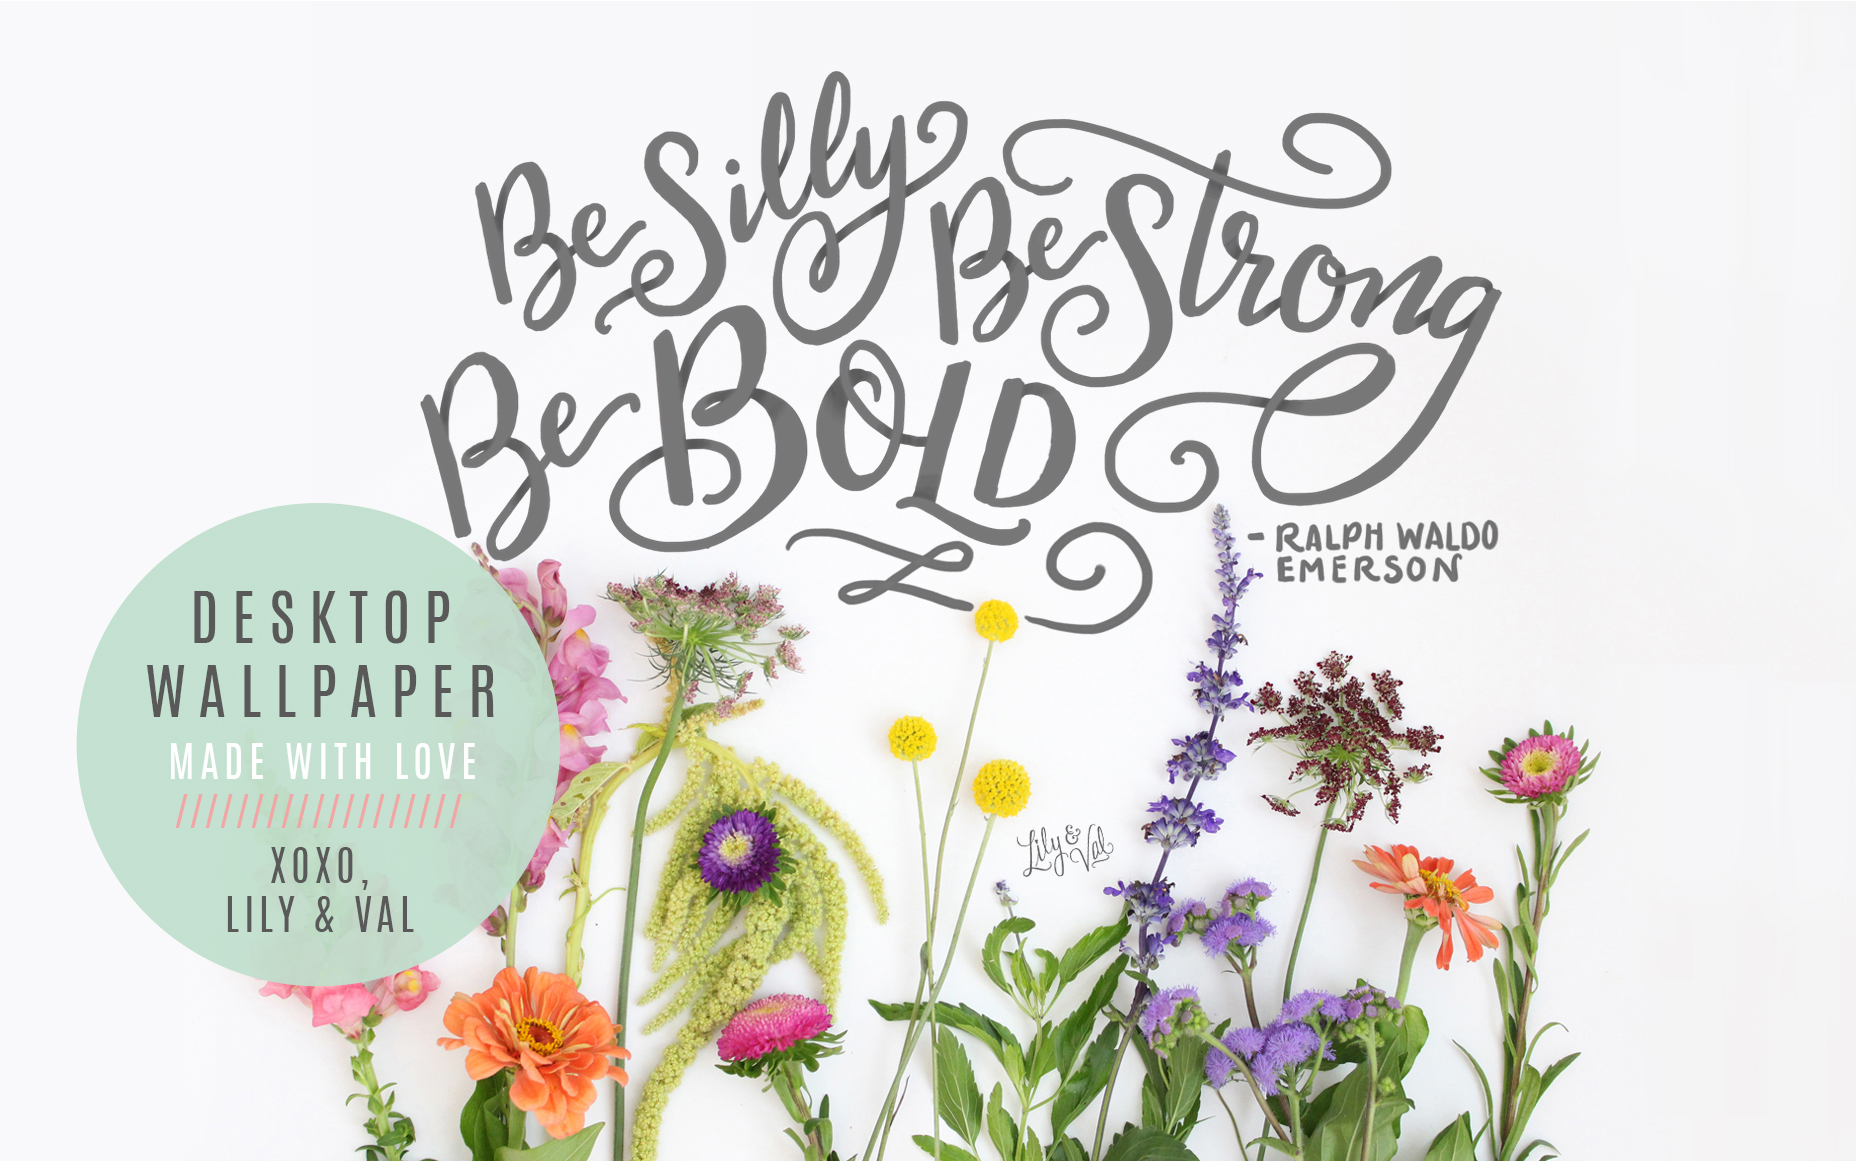 "Be silly, be strong, be bold." Floral desktop wallpaper on Lily & Val Living!